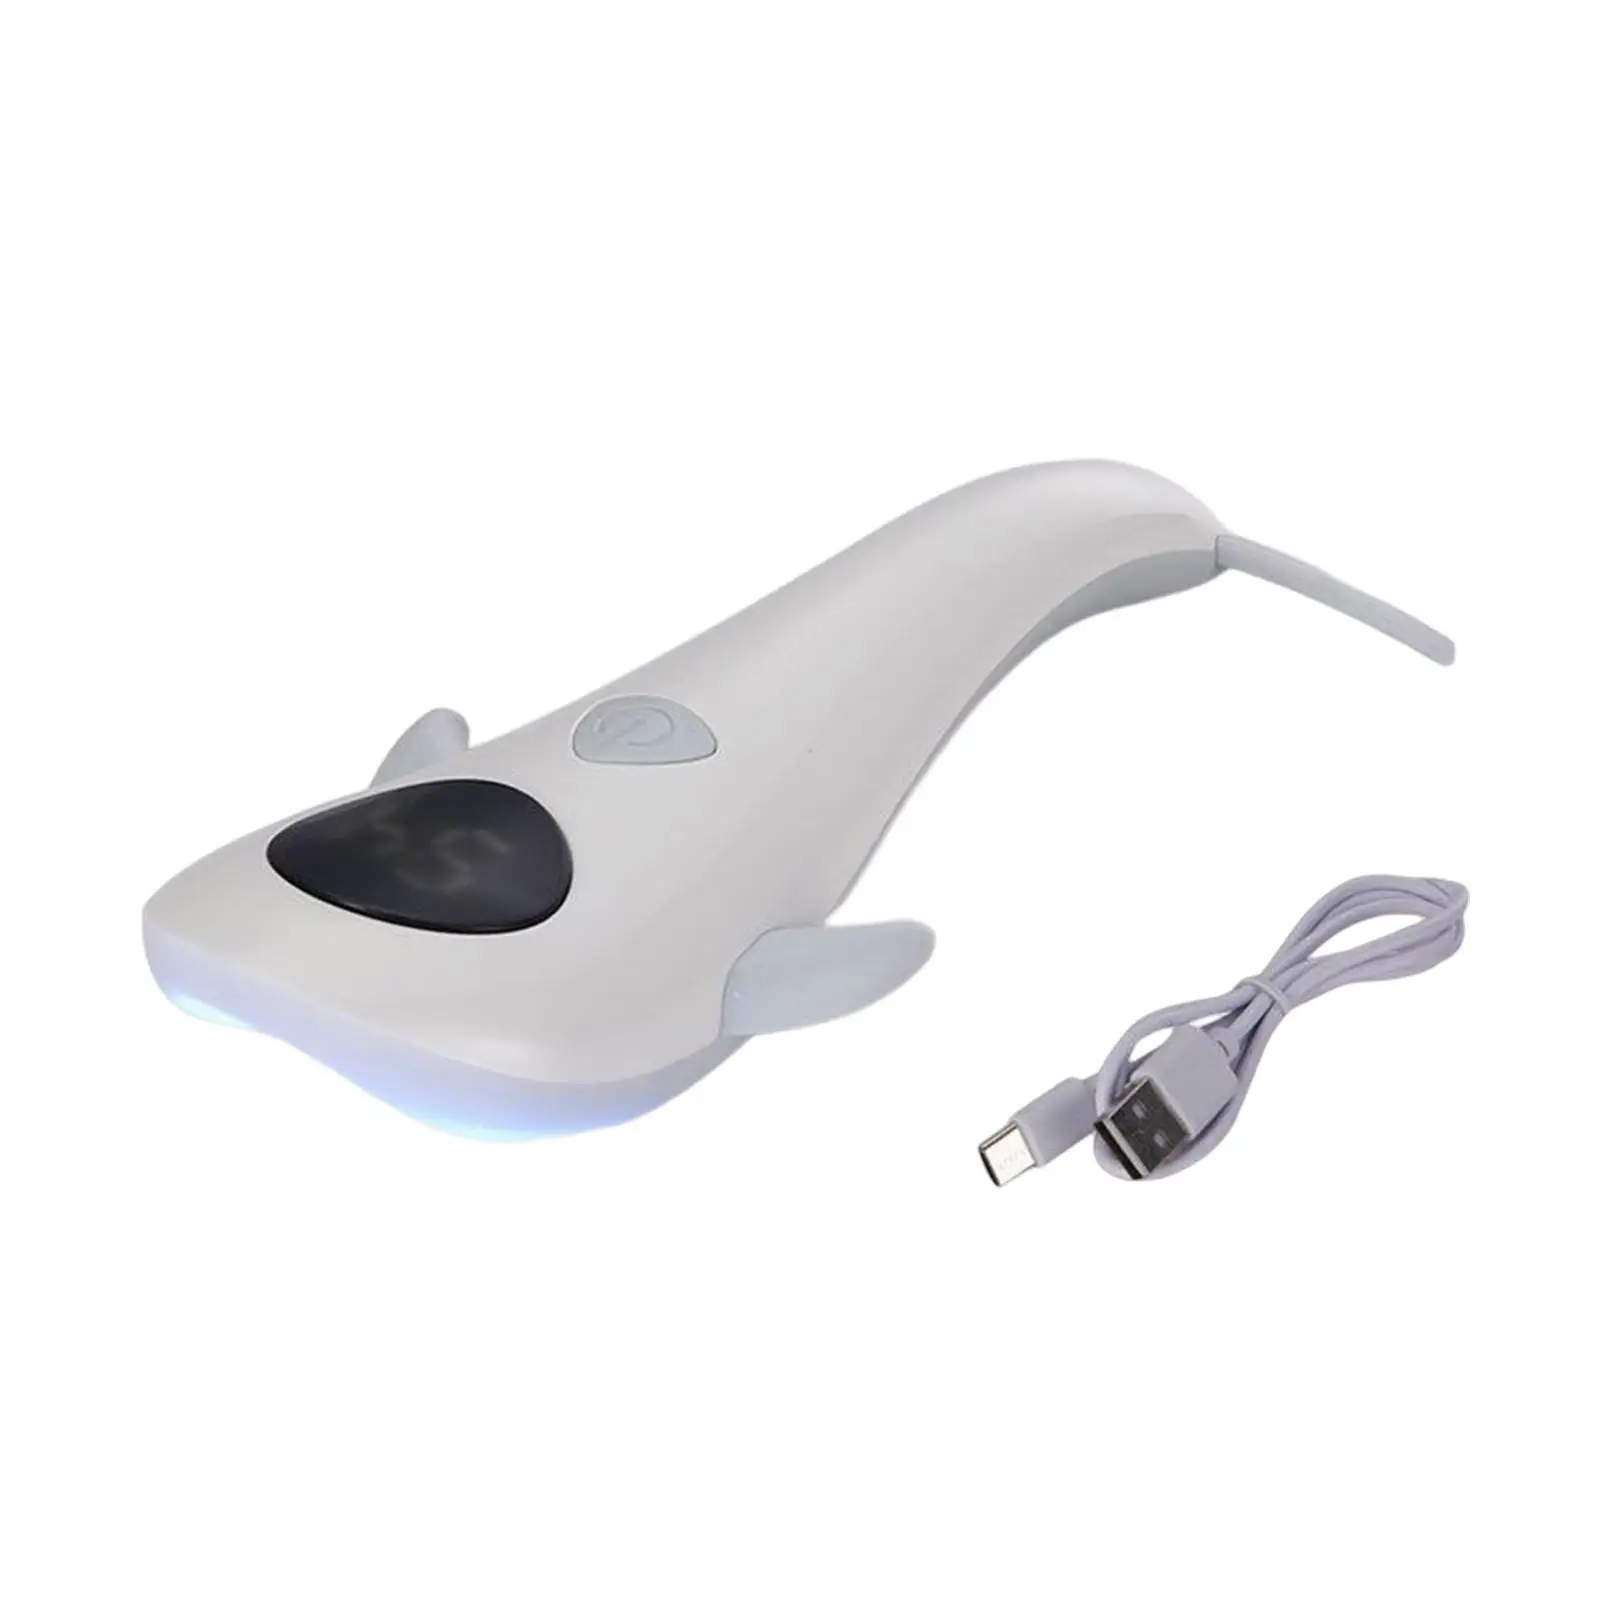 Handheld Nail Lamp with 2 Timer Setting 3 Lamp Beads Manicure Use C Salon and Home Use Digital Display 5W Gel Nail Light